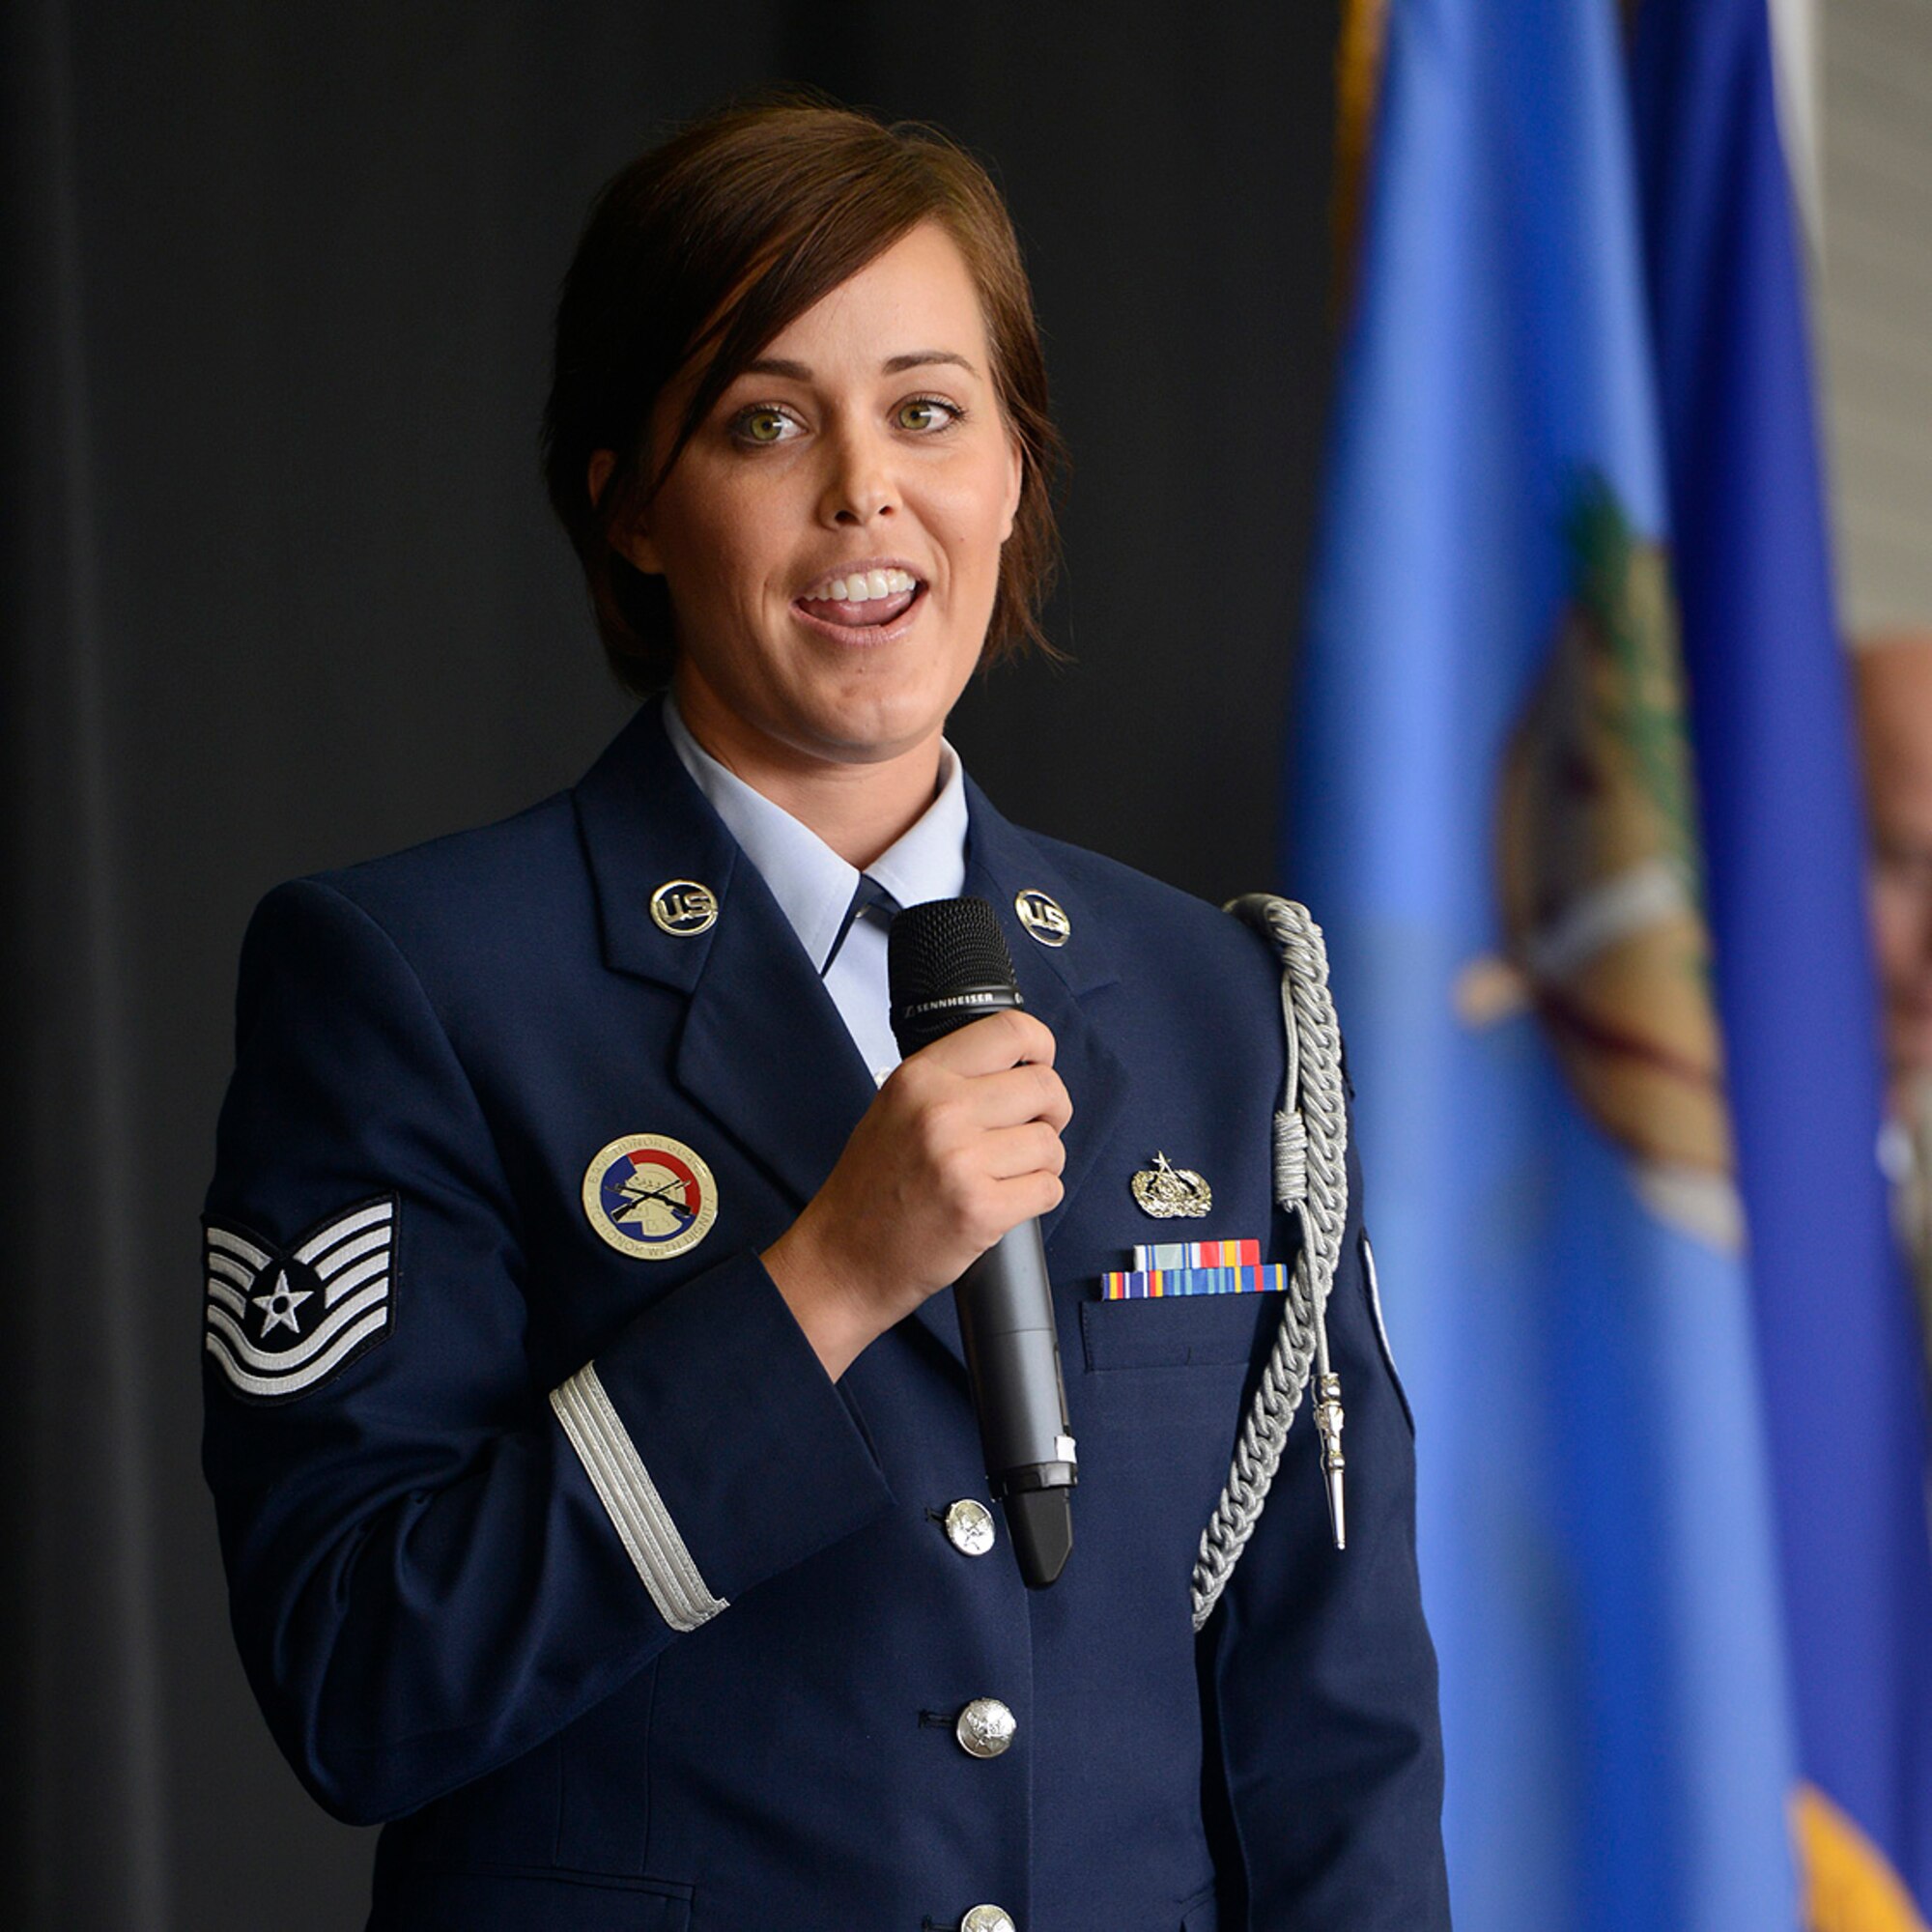 Technical Sergeant Jennifer Carson speaks to personnel of the 138th Fighter Wing during a Commanders Call at the Tulsa Air National Guard base, June 8, 2014.  Carson is an active member of the 138th Honor Guard which is currently seeking to recruit new members.   (U.S. National Guard photo by Master Sgt.  Mark A. Moore/Released)